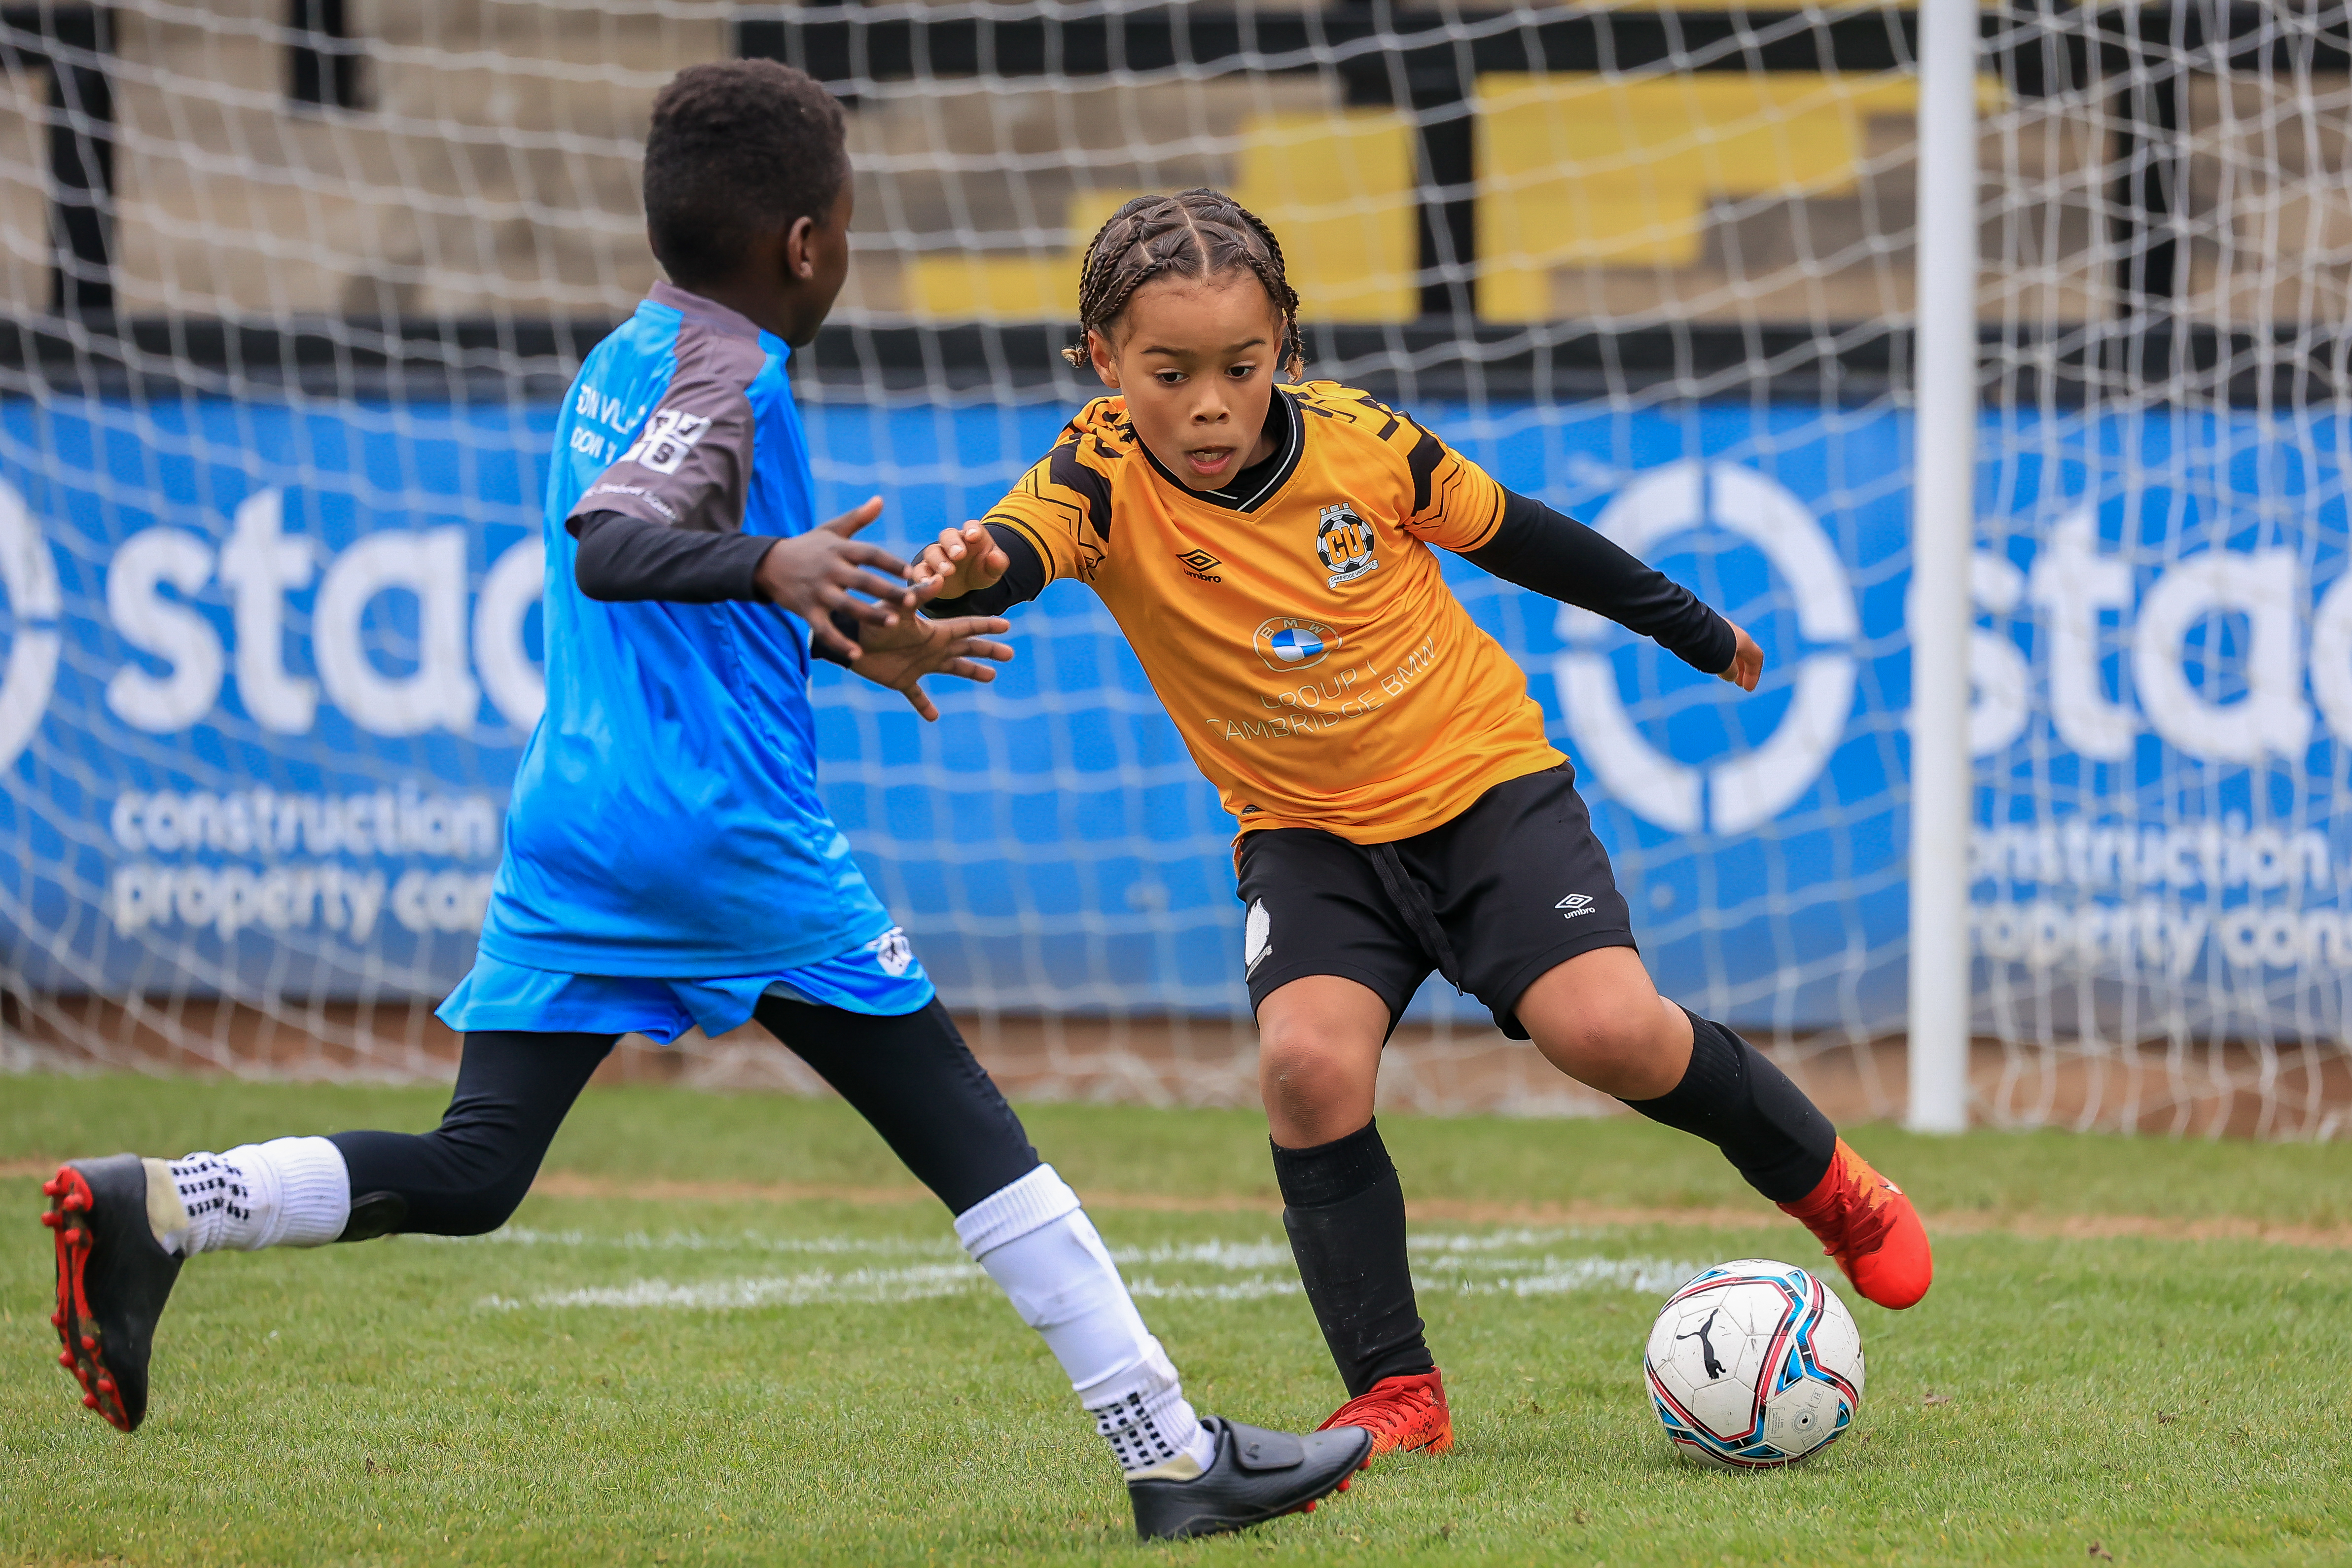 A Cambridge United Academy player takes on his opposition